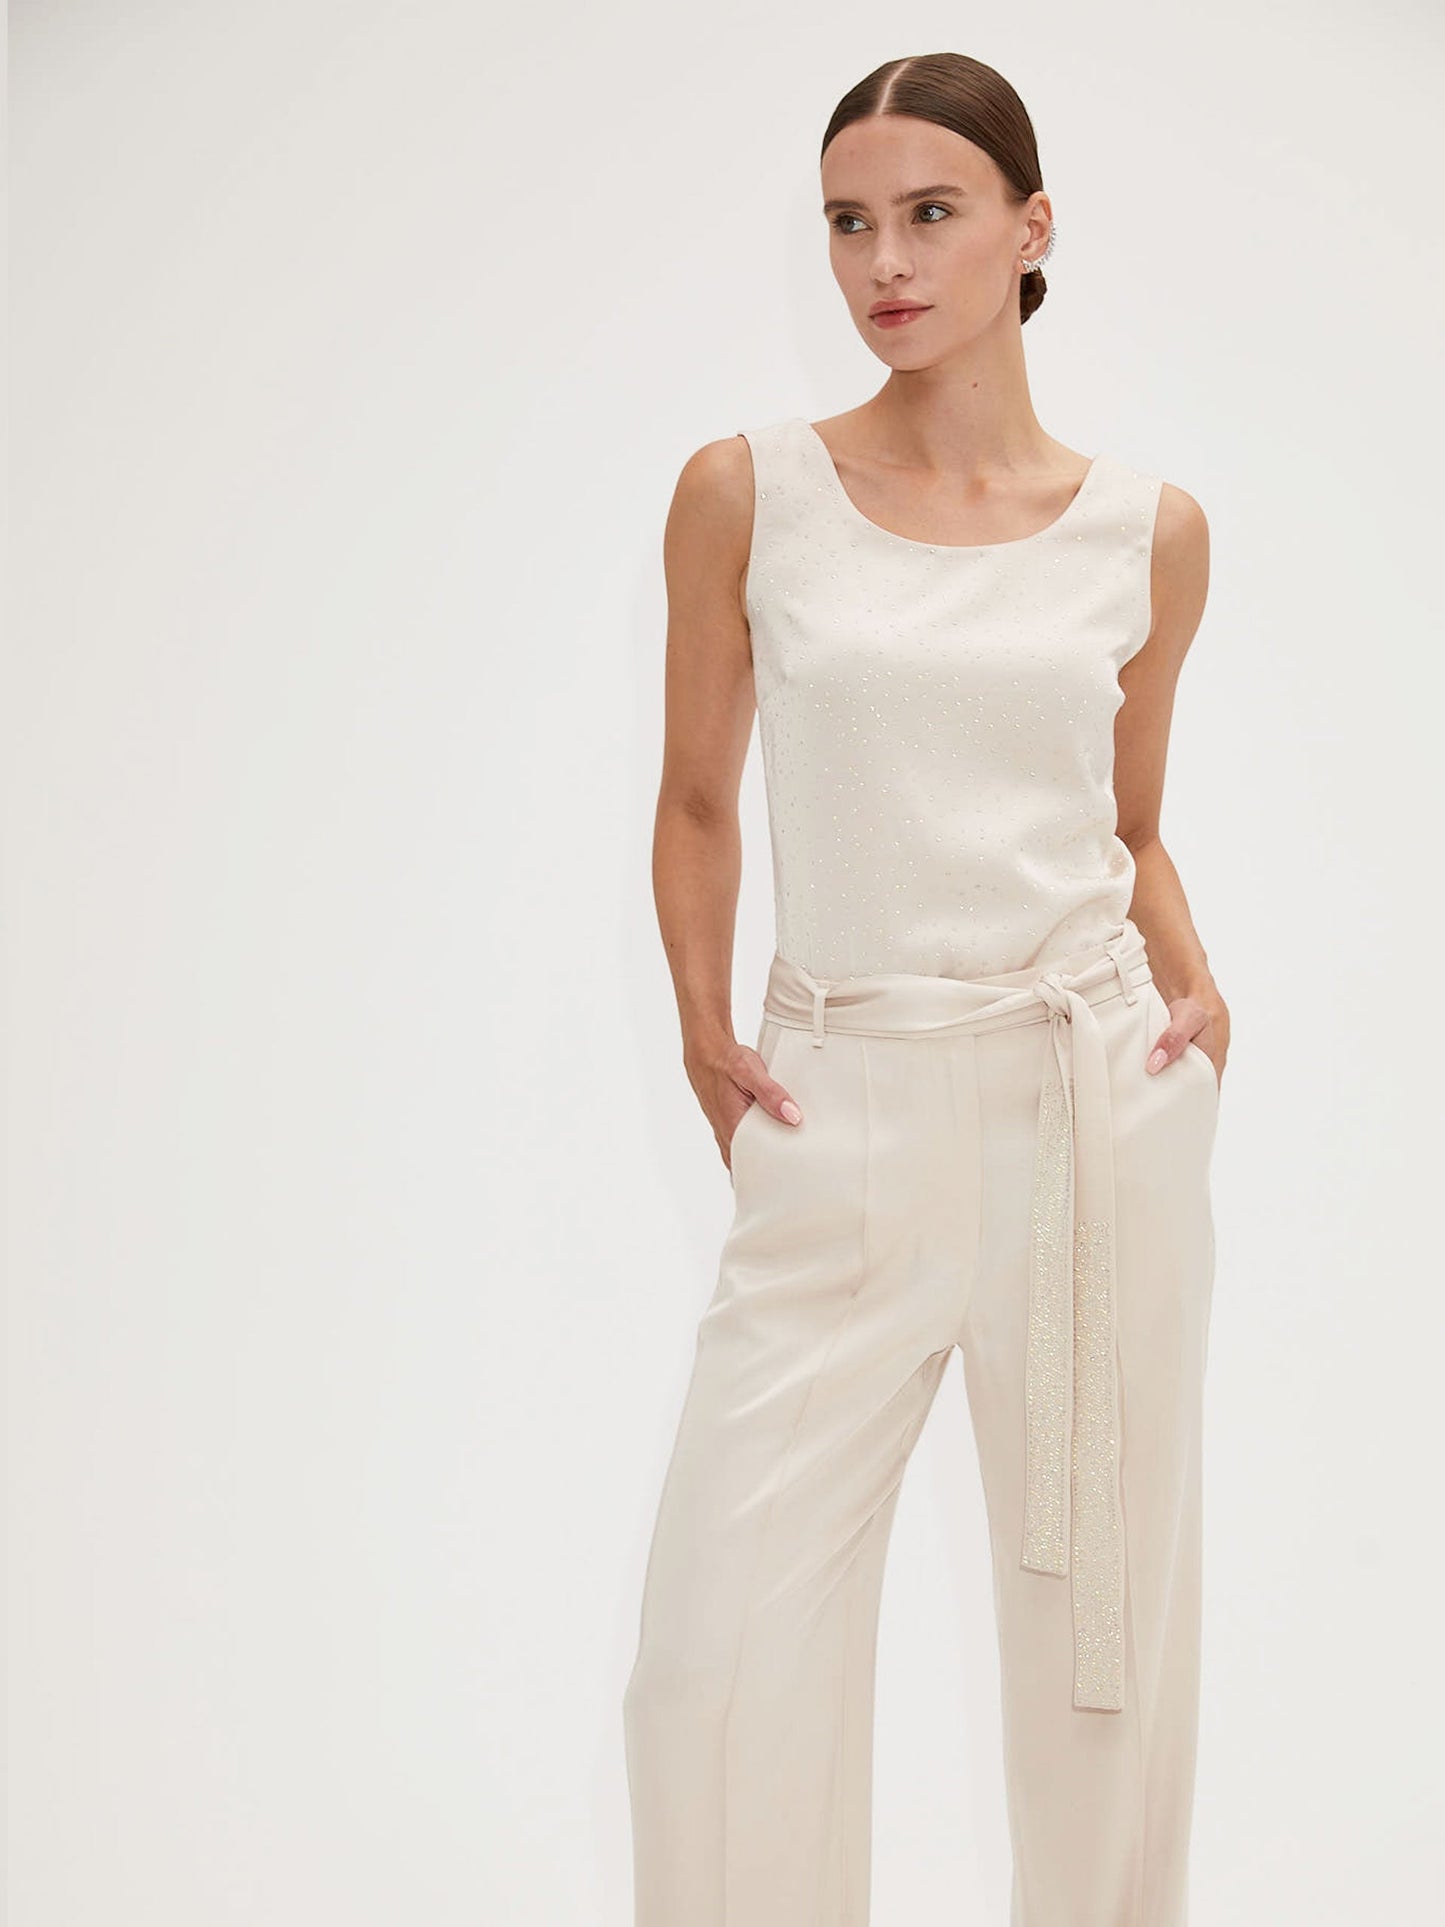 Ecru Trousers with Cord Tie